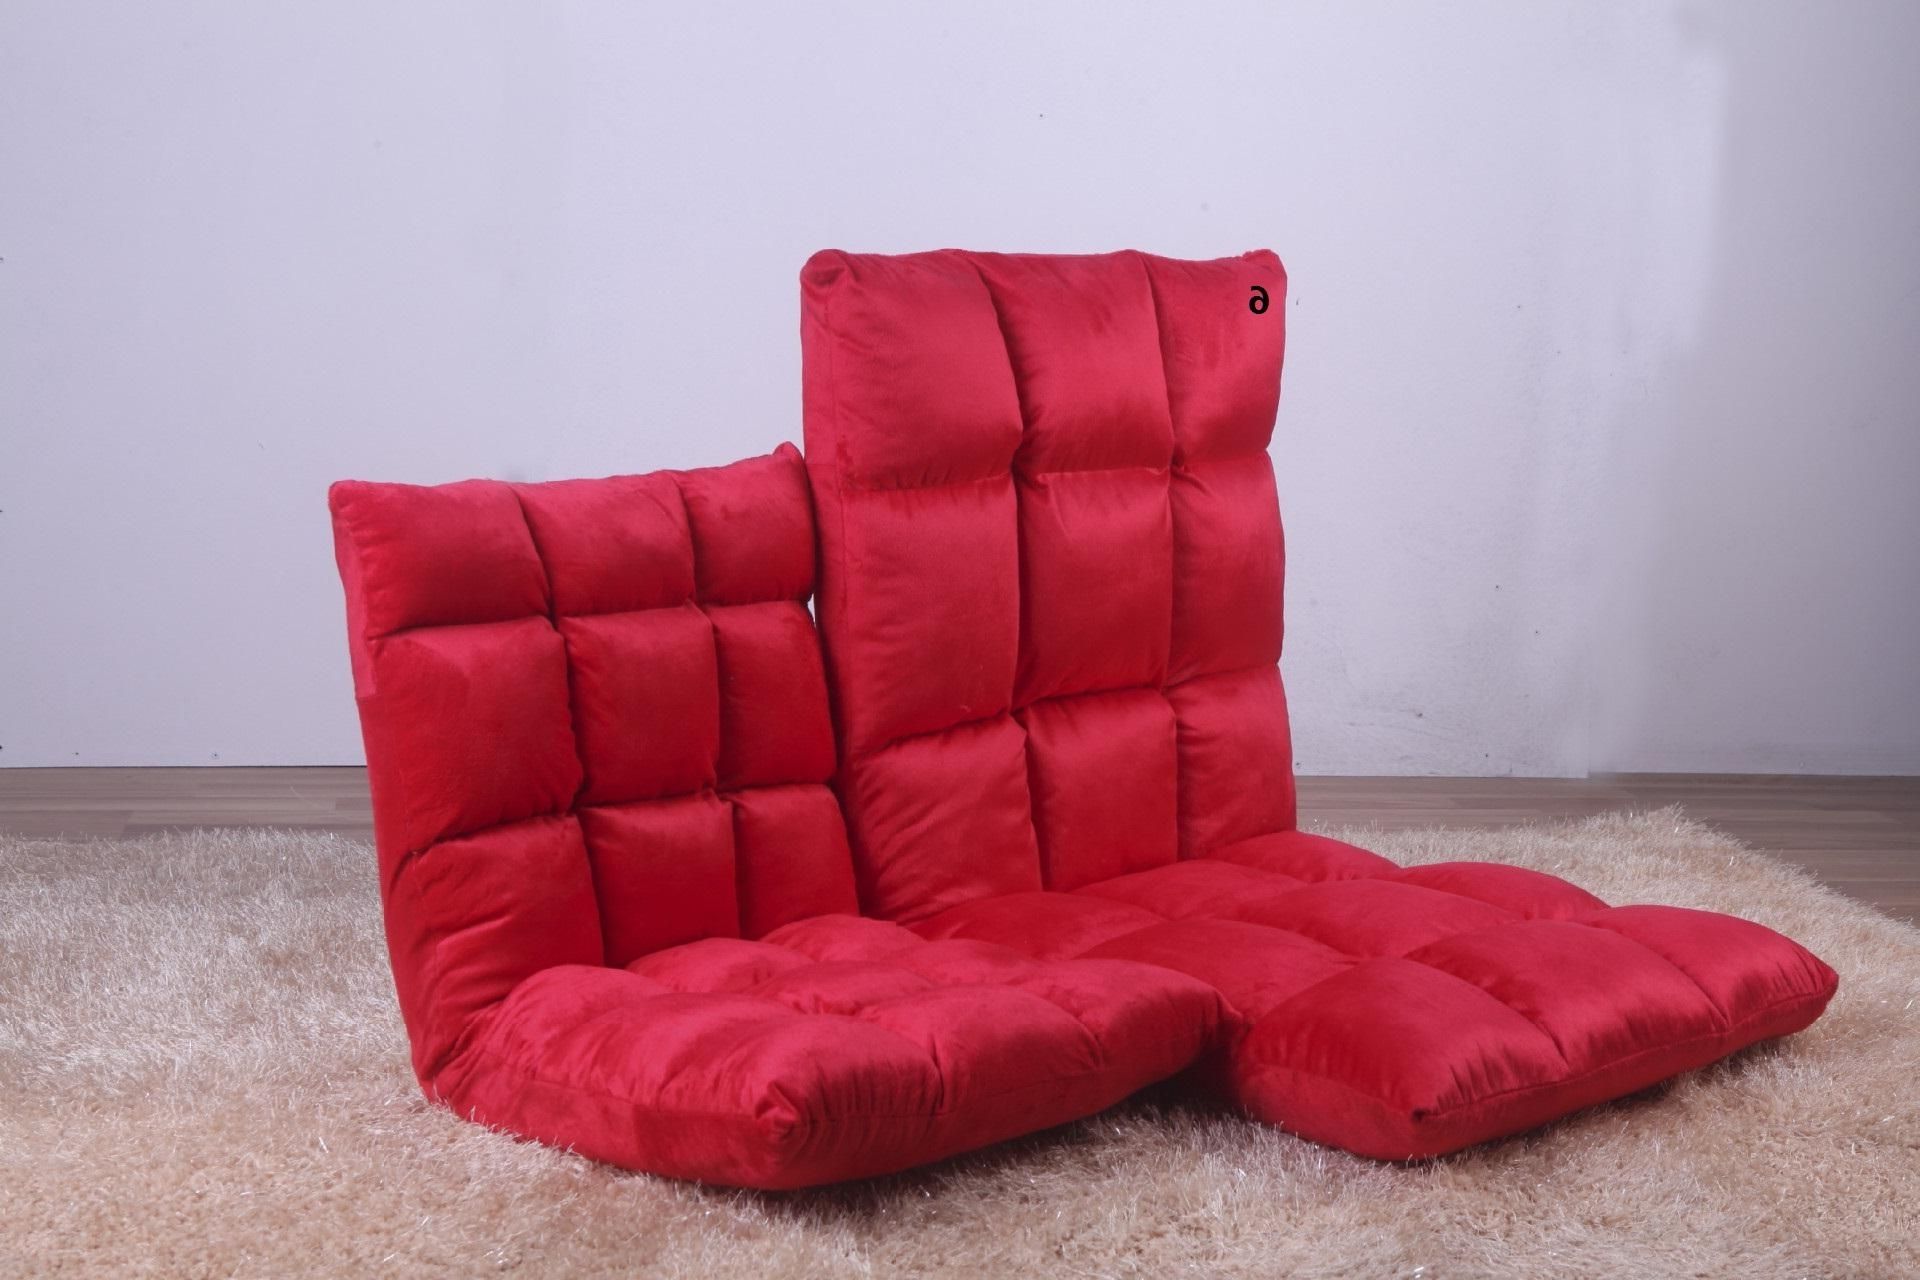 2018 6 Gears Lazy Sofa Couch Couch Rice Small Single Sofa Chair With Regard To Fashionable Lazy Sofa Chairs (View 1 of 20)